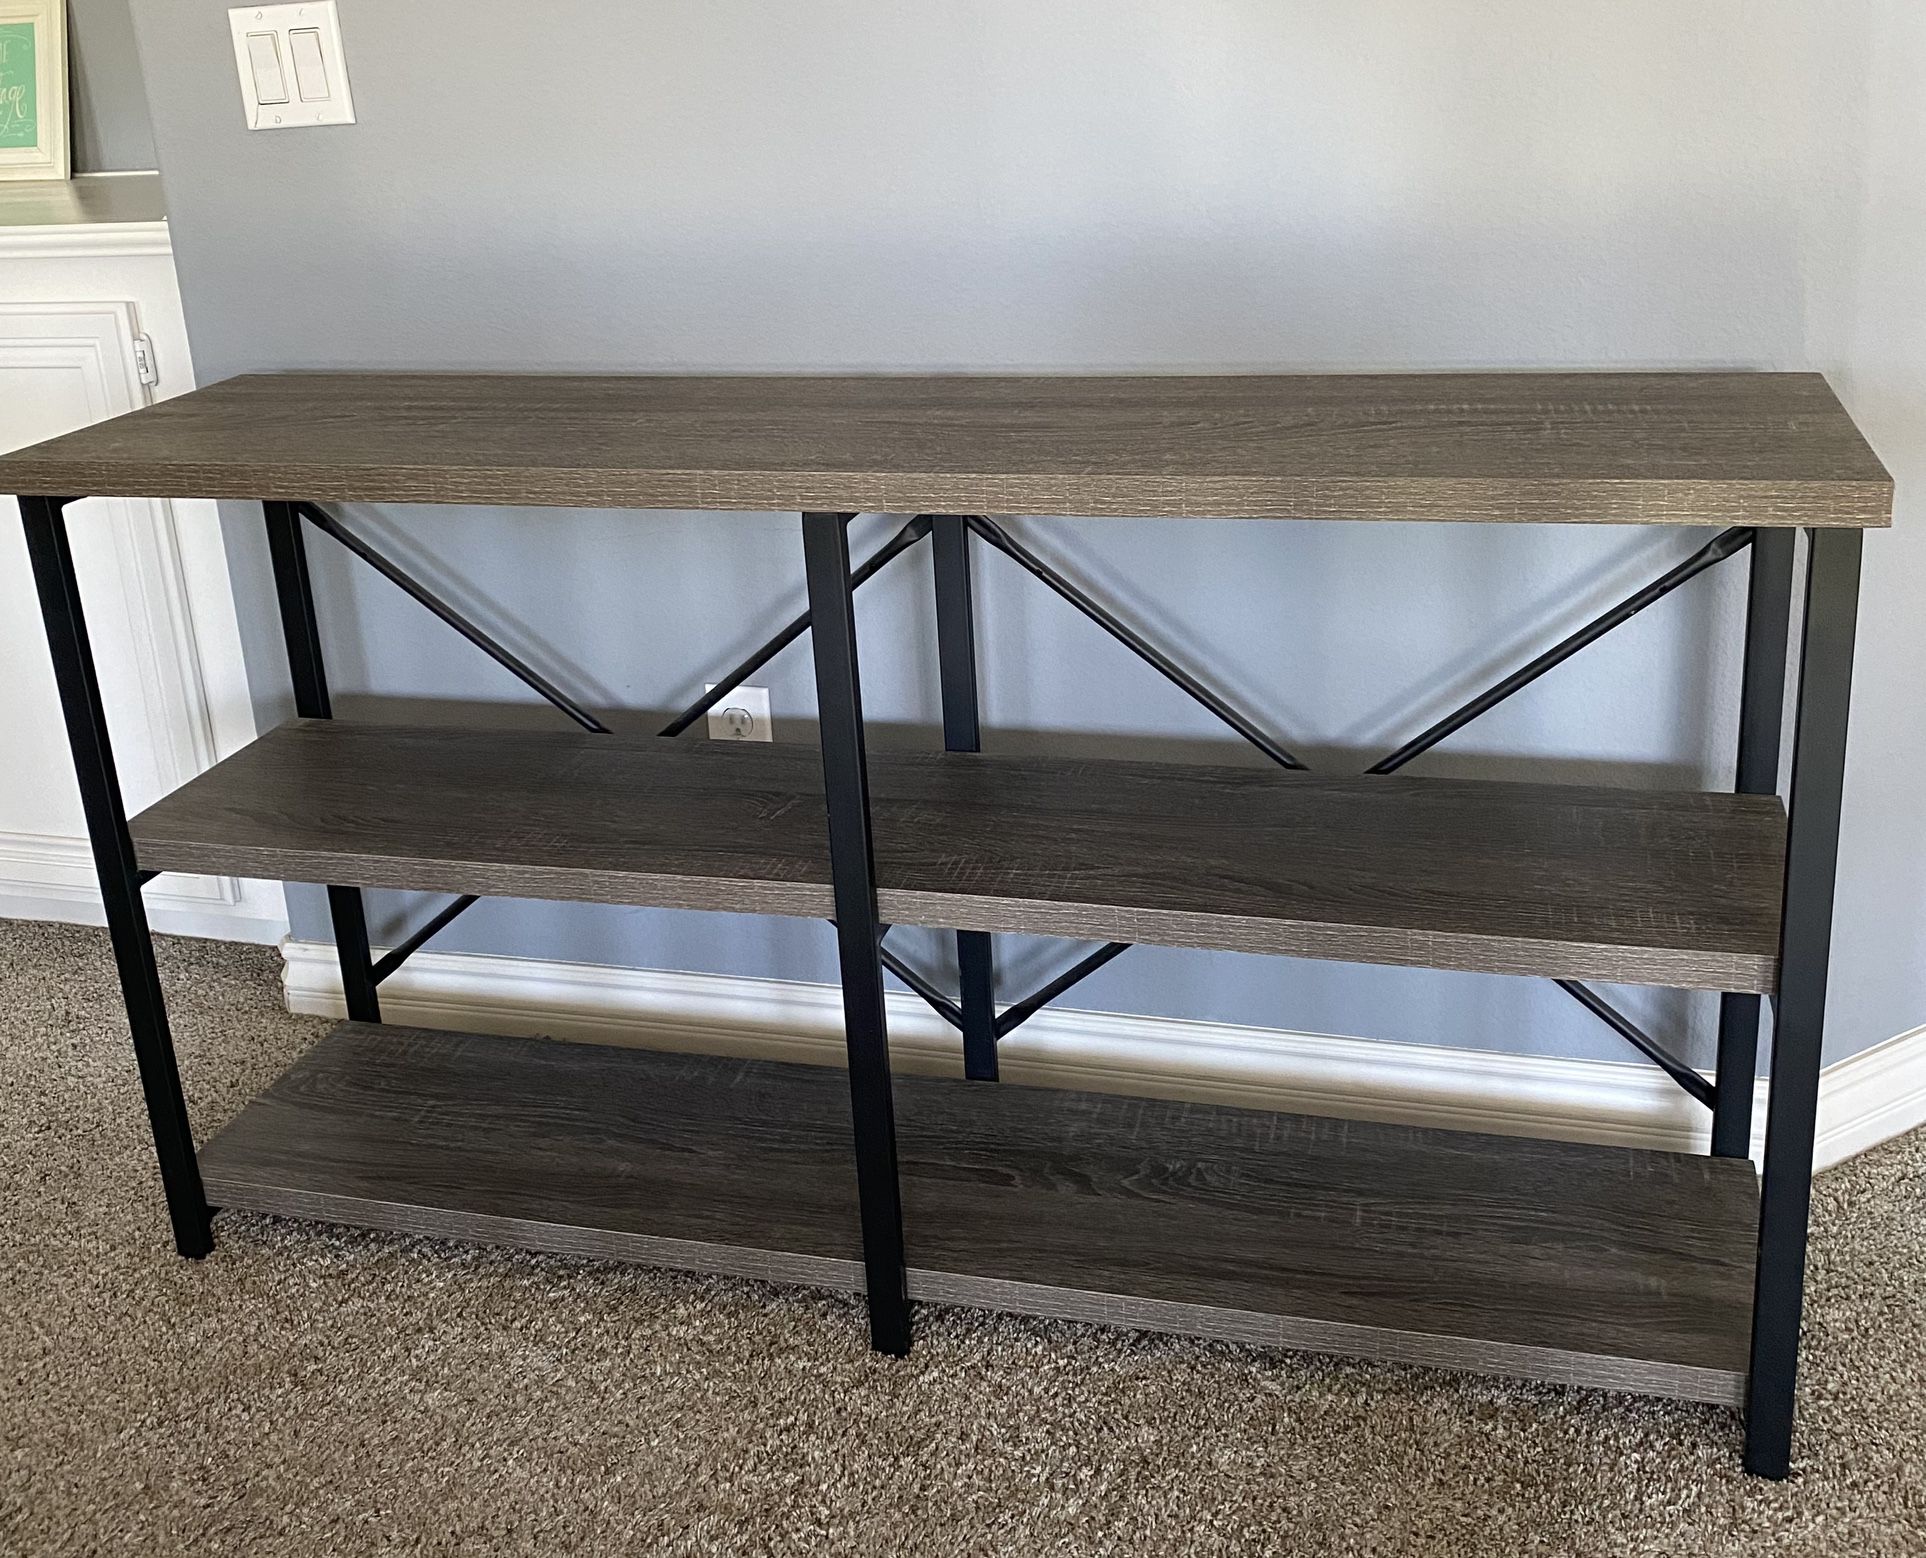 3 Tiered Console Table